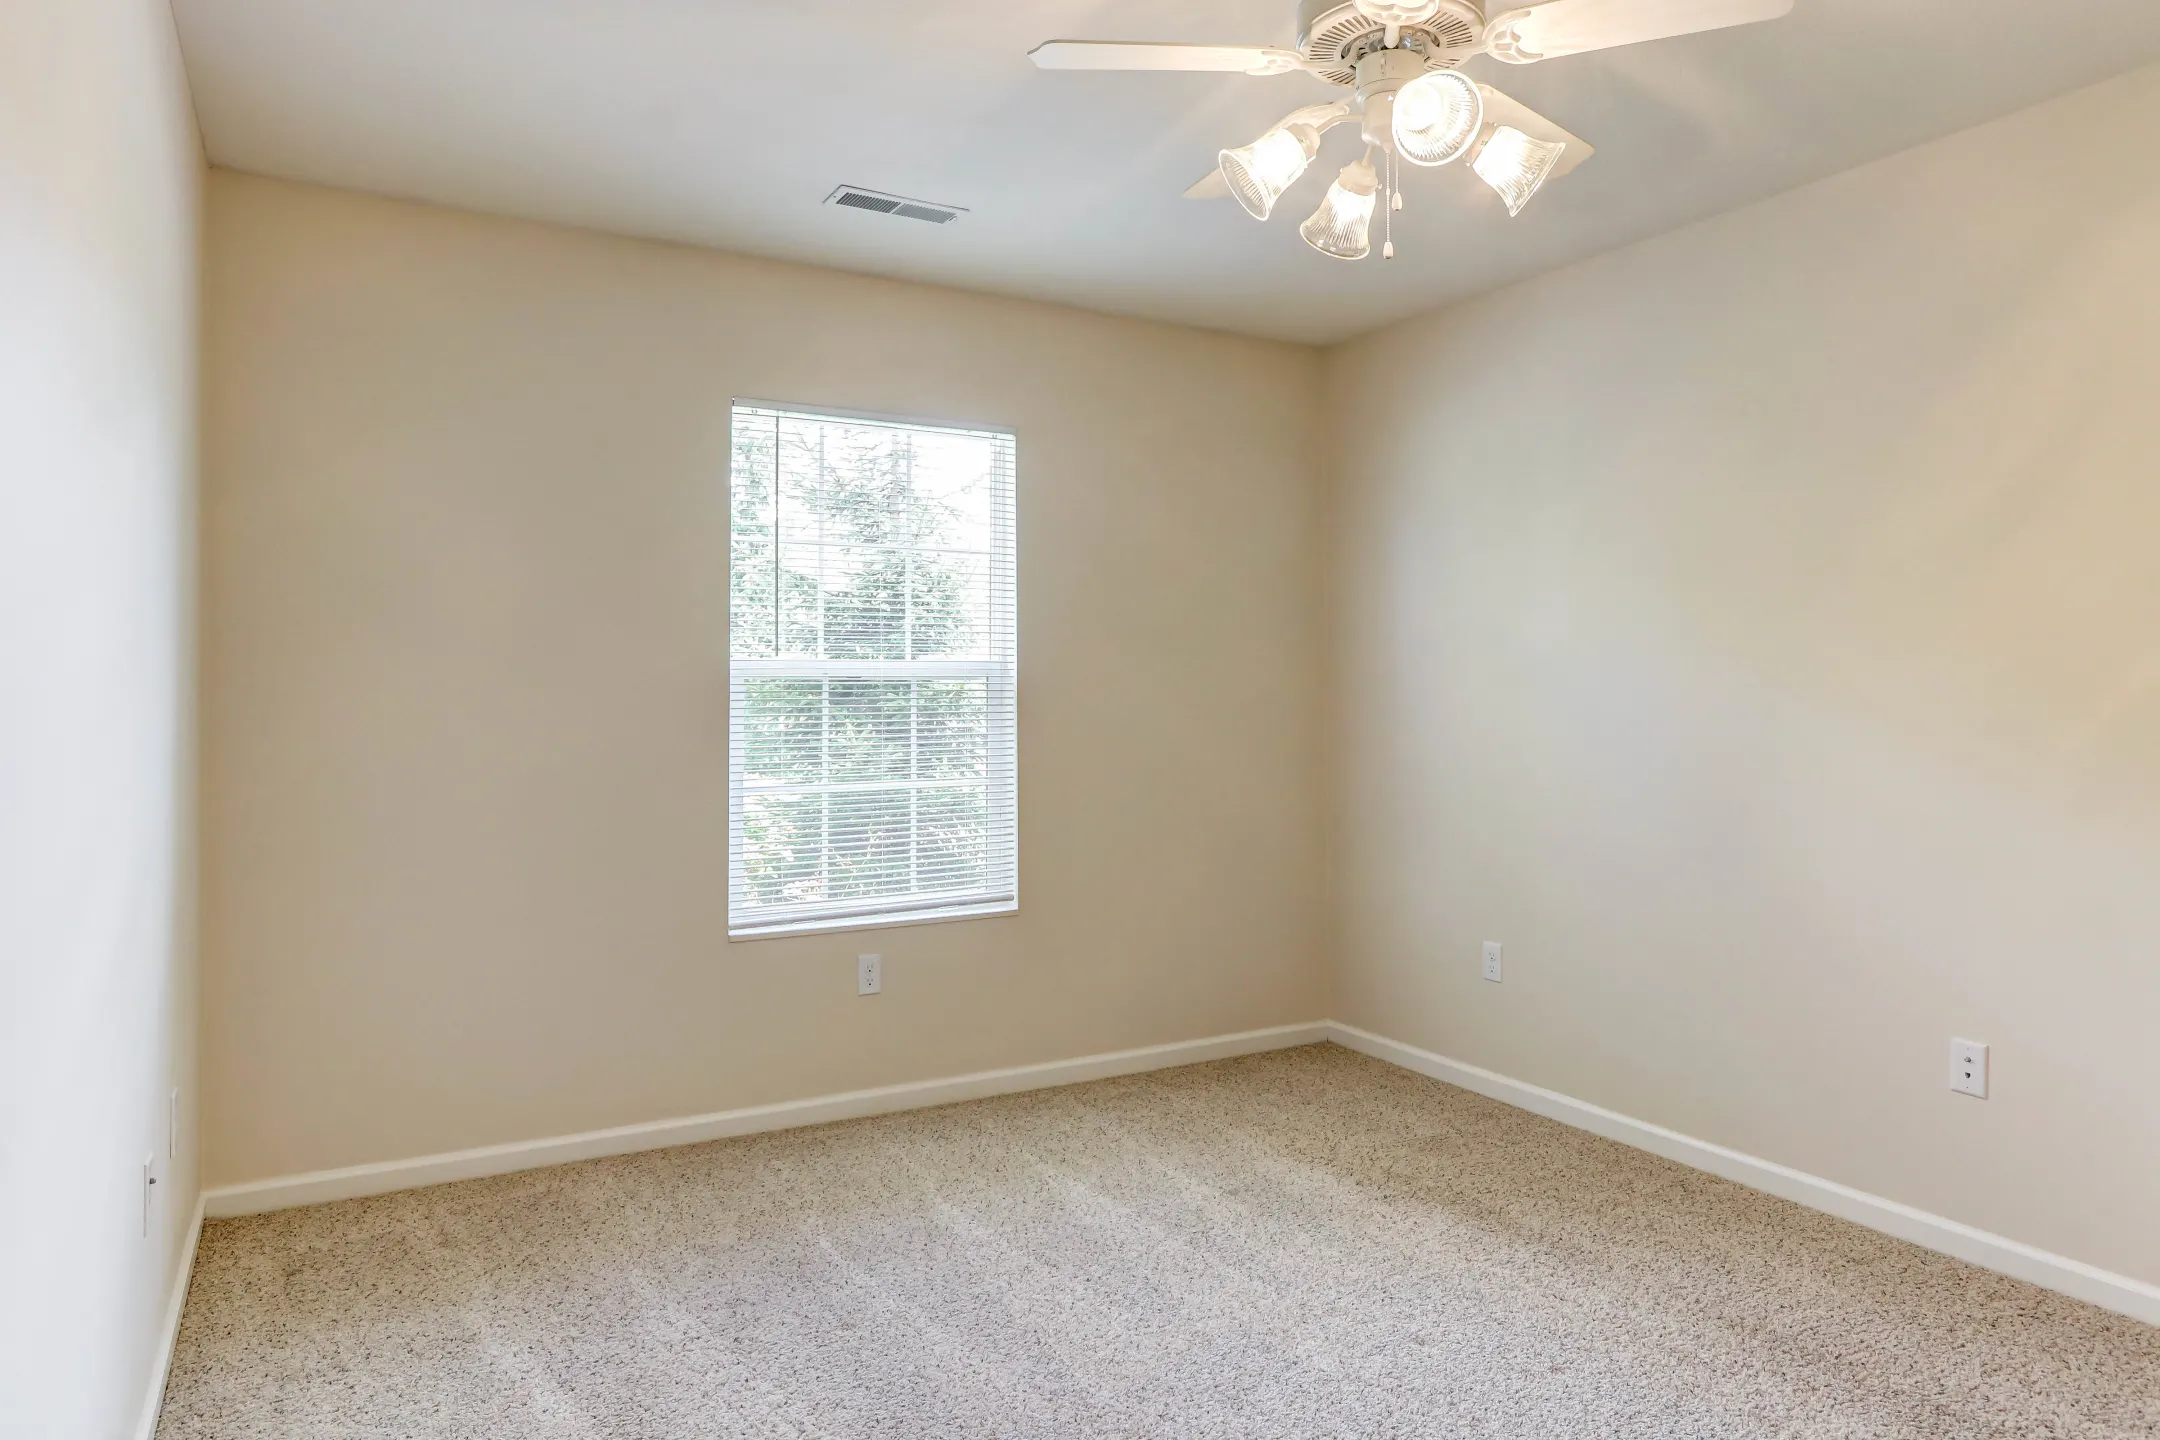 Bedroom - Pointe At Evans Lake - Youngstown, OH